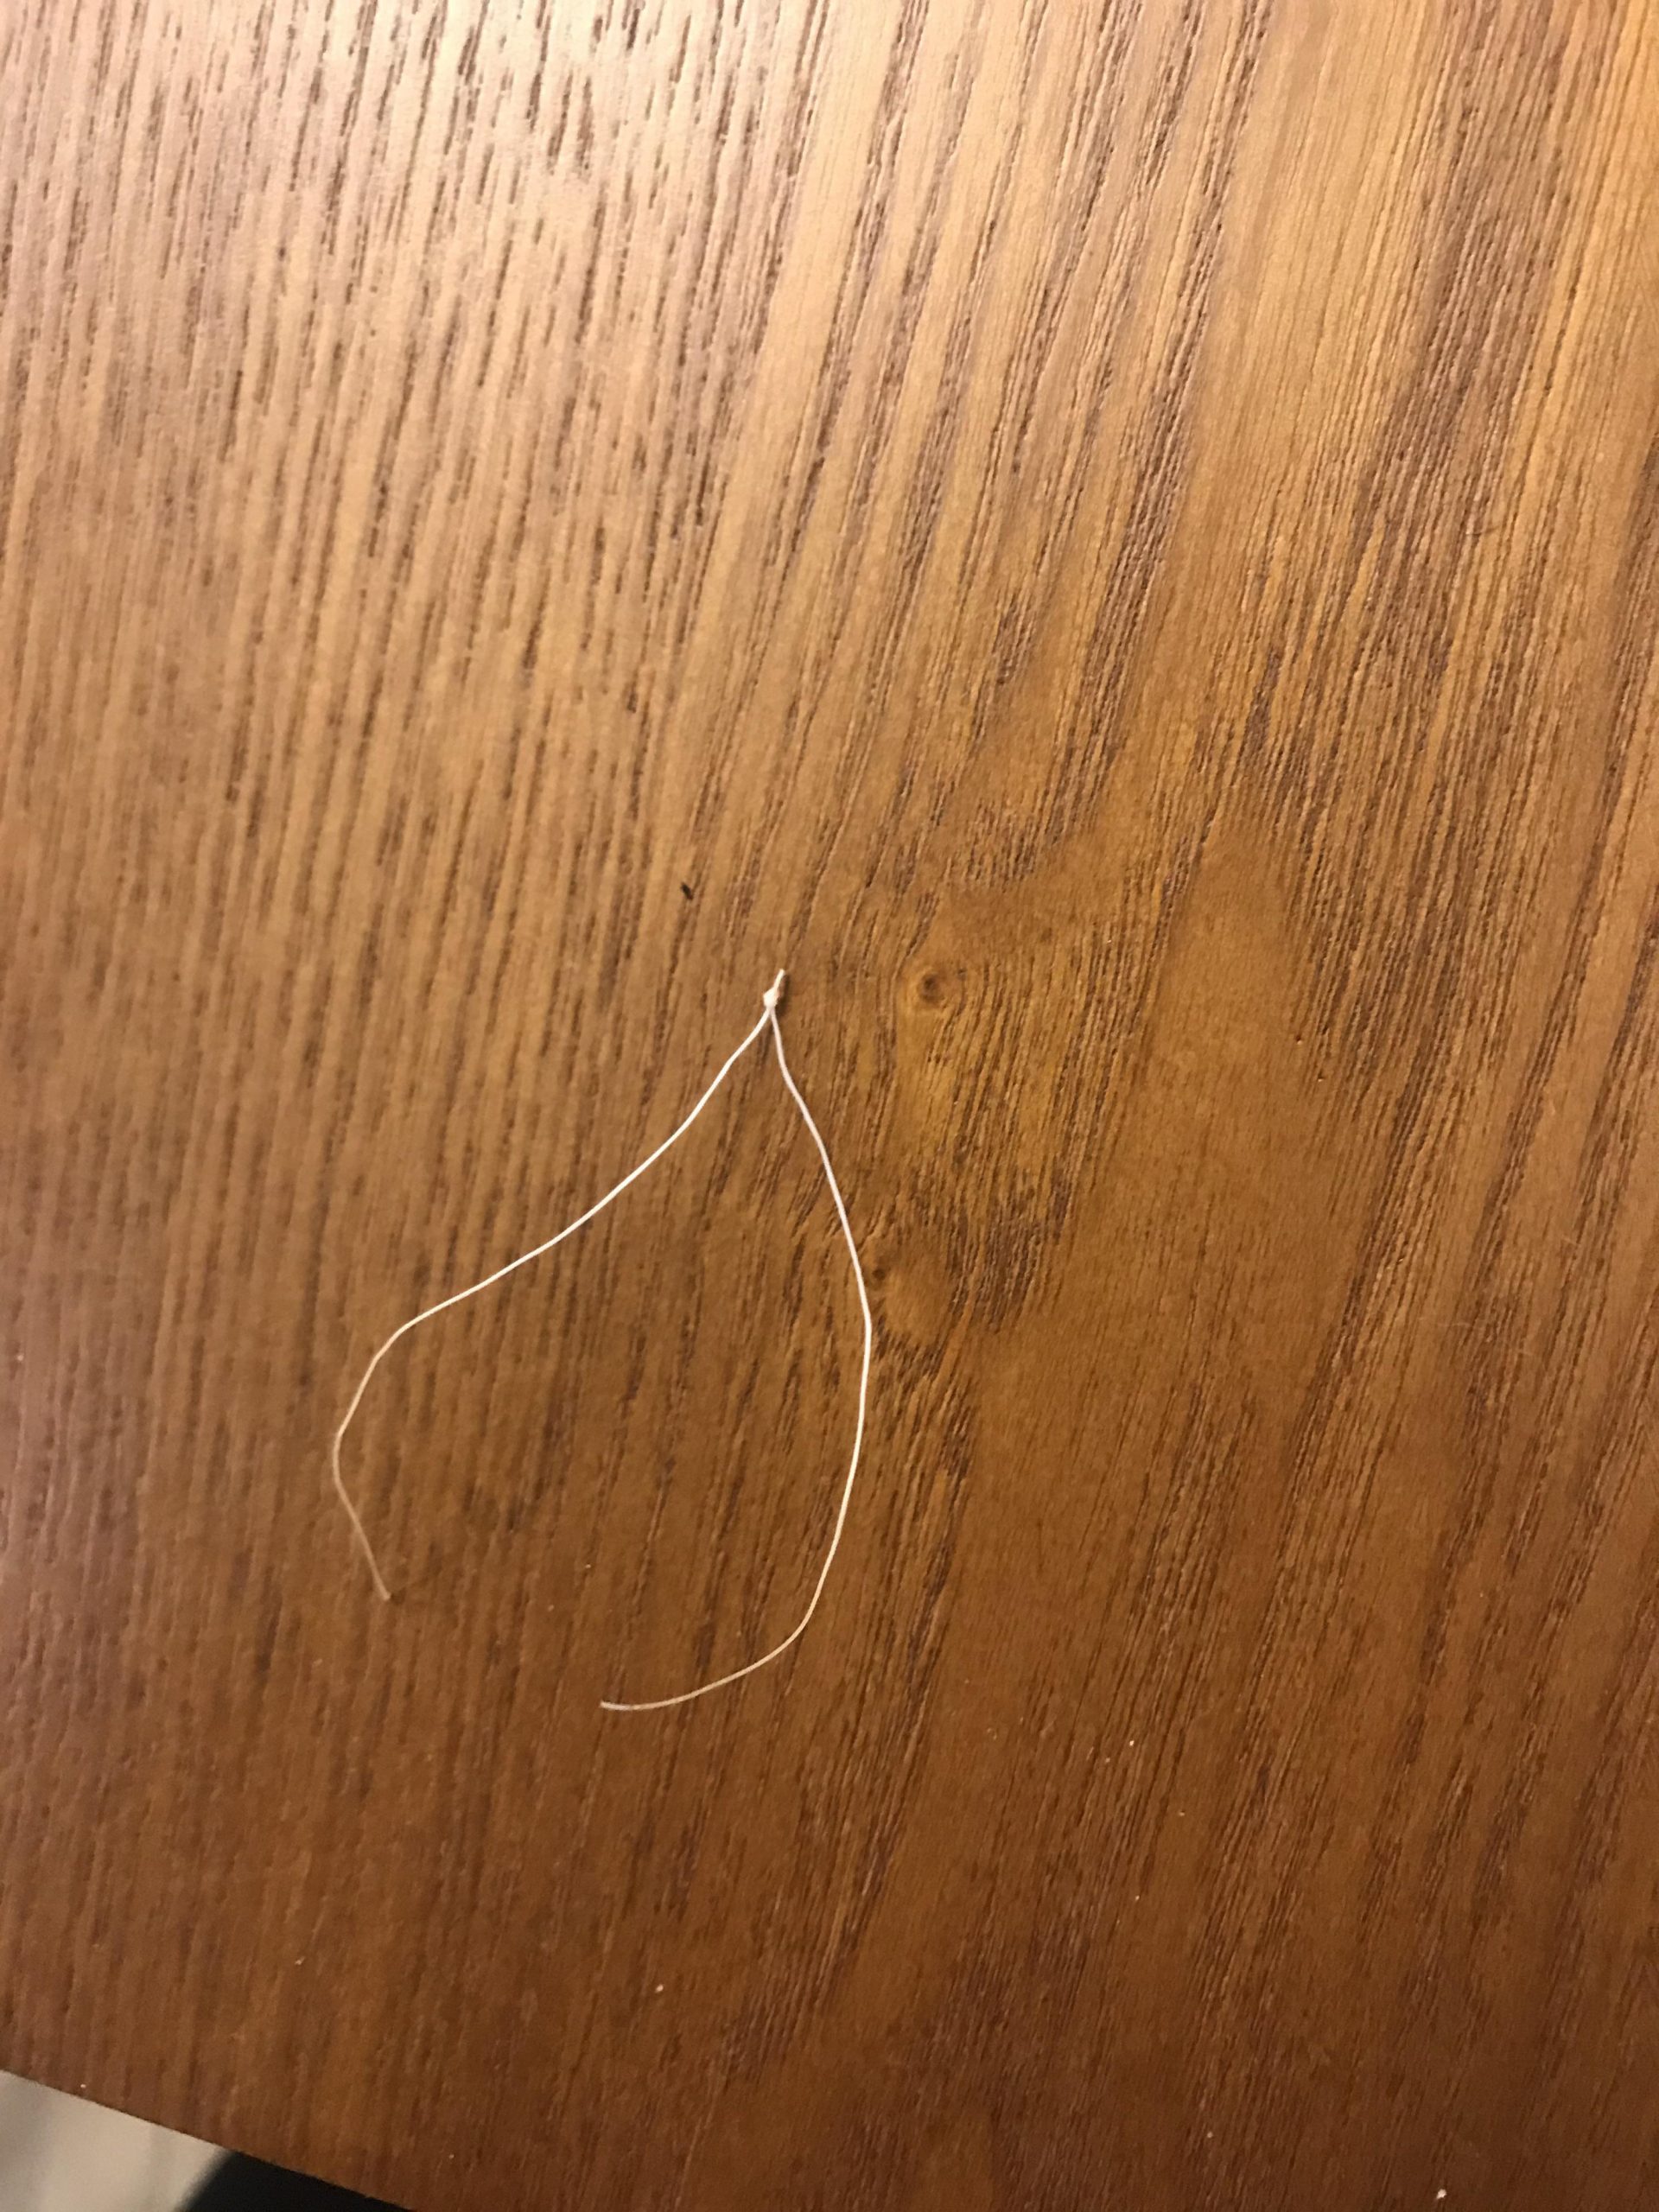 IUD string literally fell off. What do I do next? : obgyn